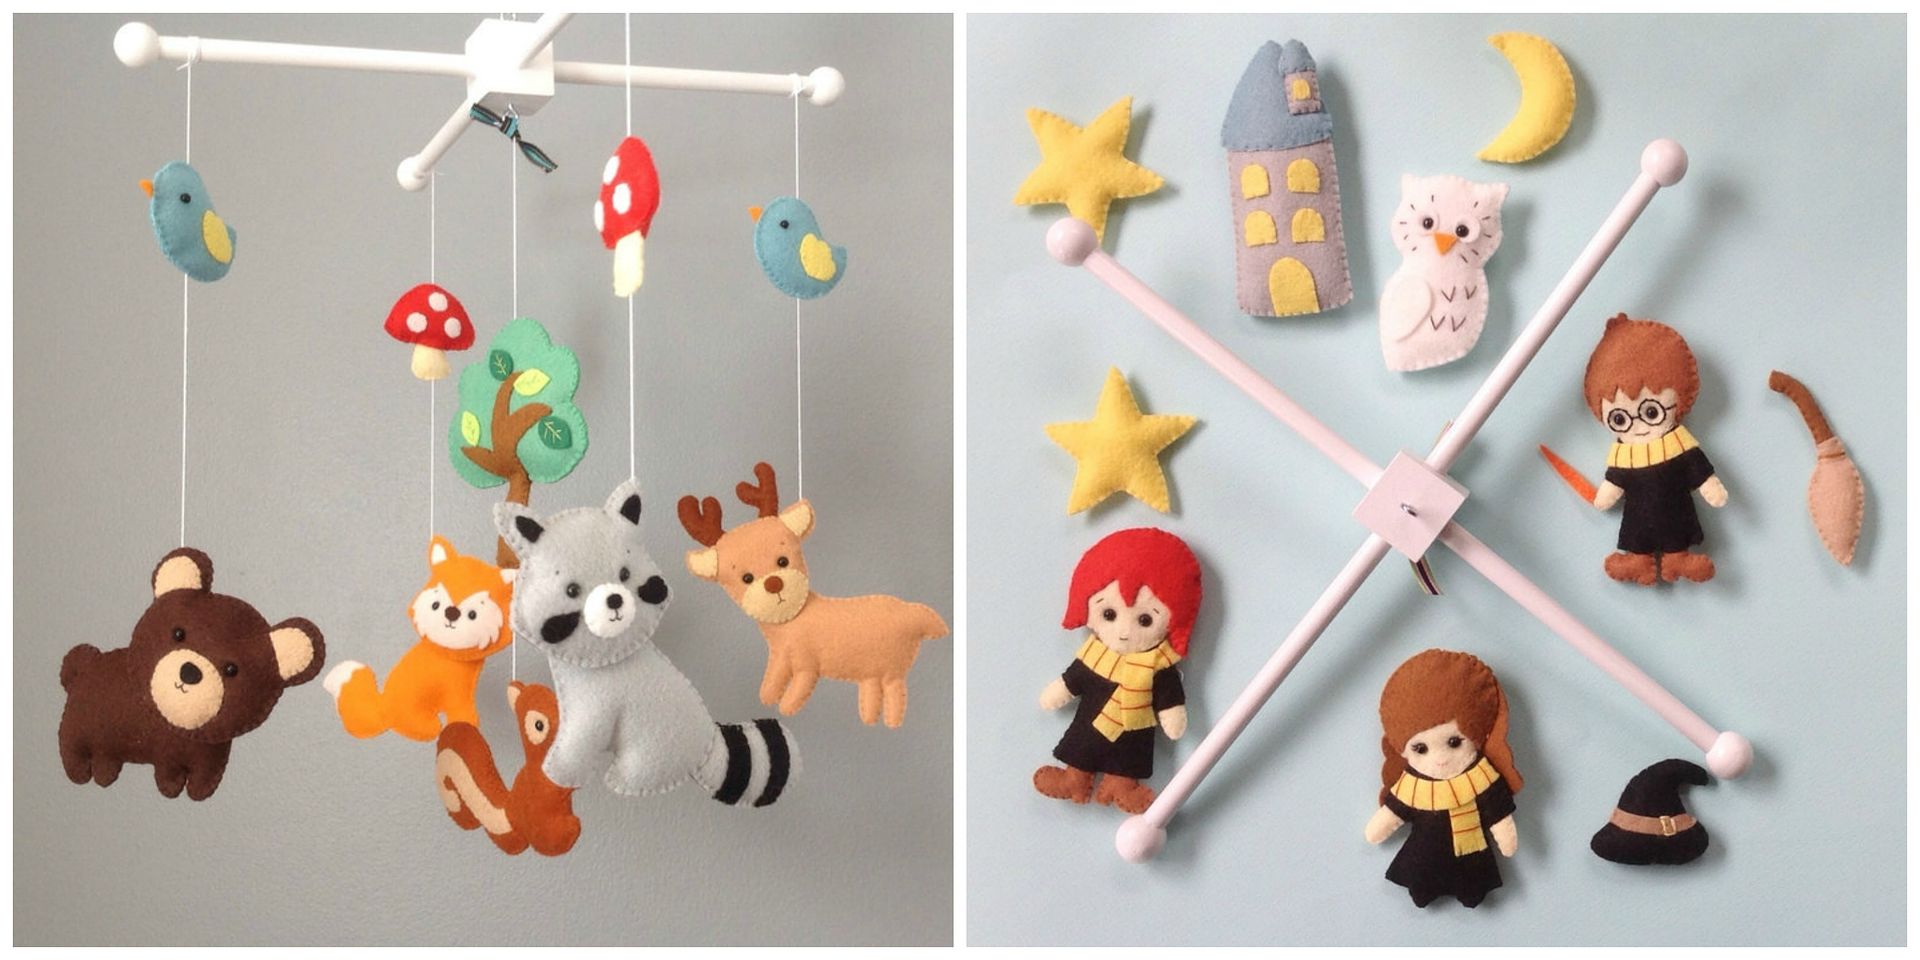 Coolest baby gifts of the year: Wonderfeltland handmade mobiles | Cool Mom Picks Editors' Best